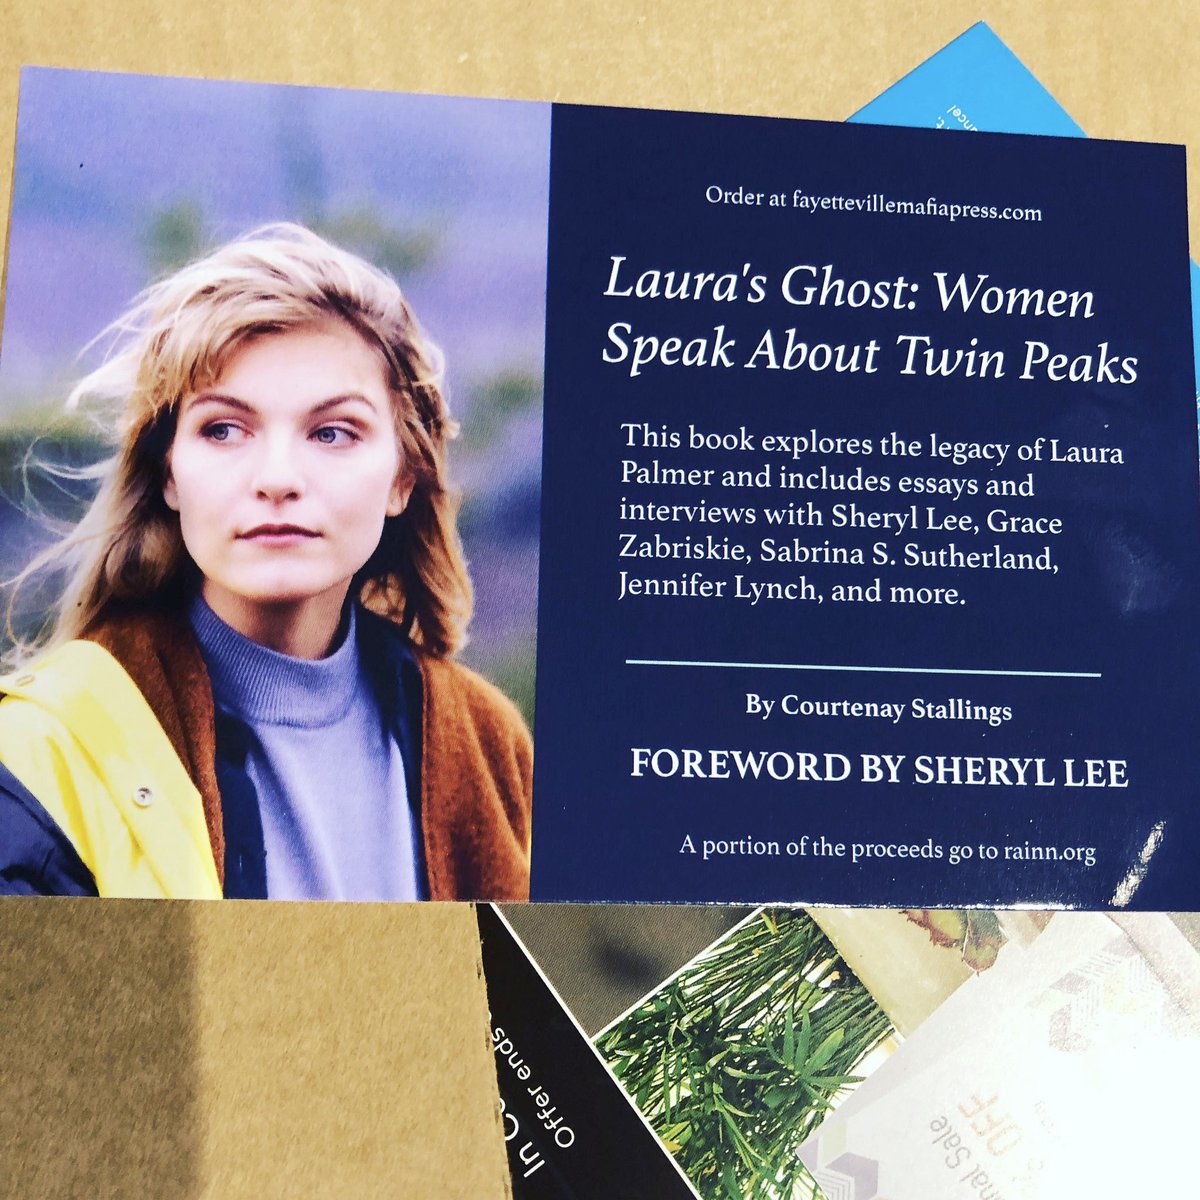 Four years ago, I pledged to write a book about Twin Peaks that would explore Laura Palmer's legacy and give a platform for women in the fan community to speak. This year, by God, I'm finally publishing 'Laura's Ghost: Women Speak About Twin Peaks.'